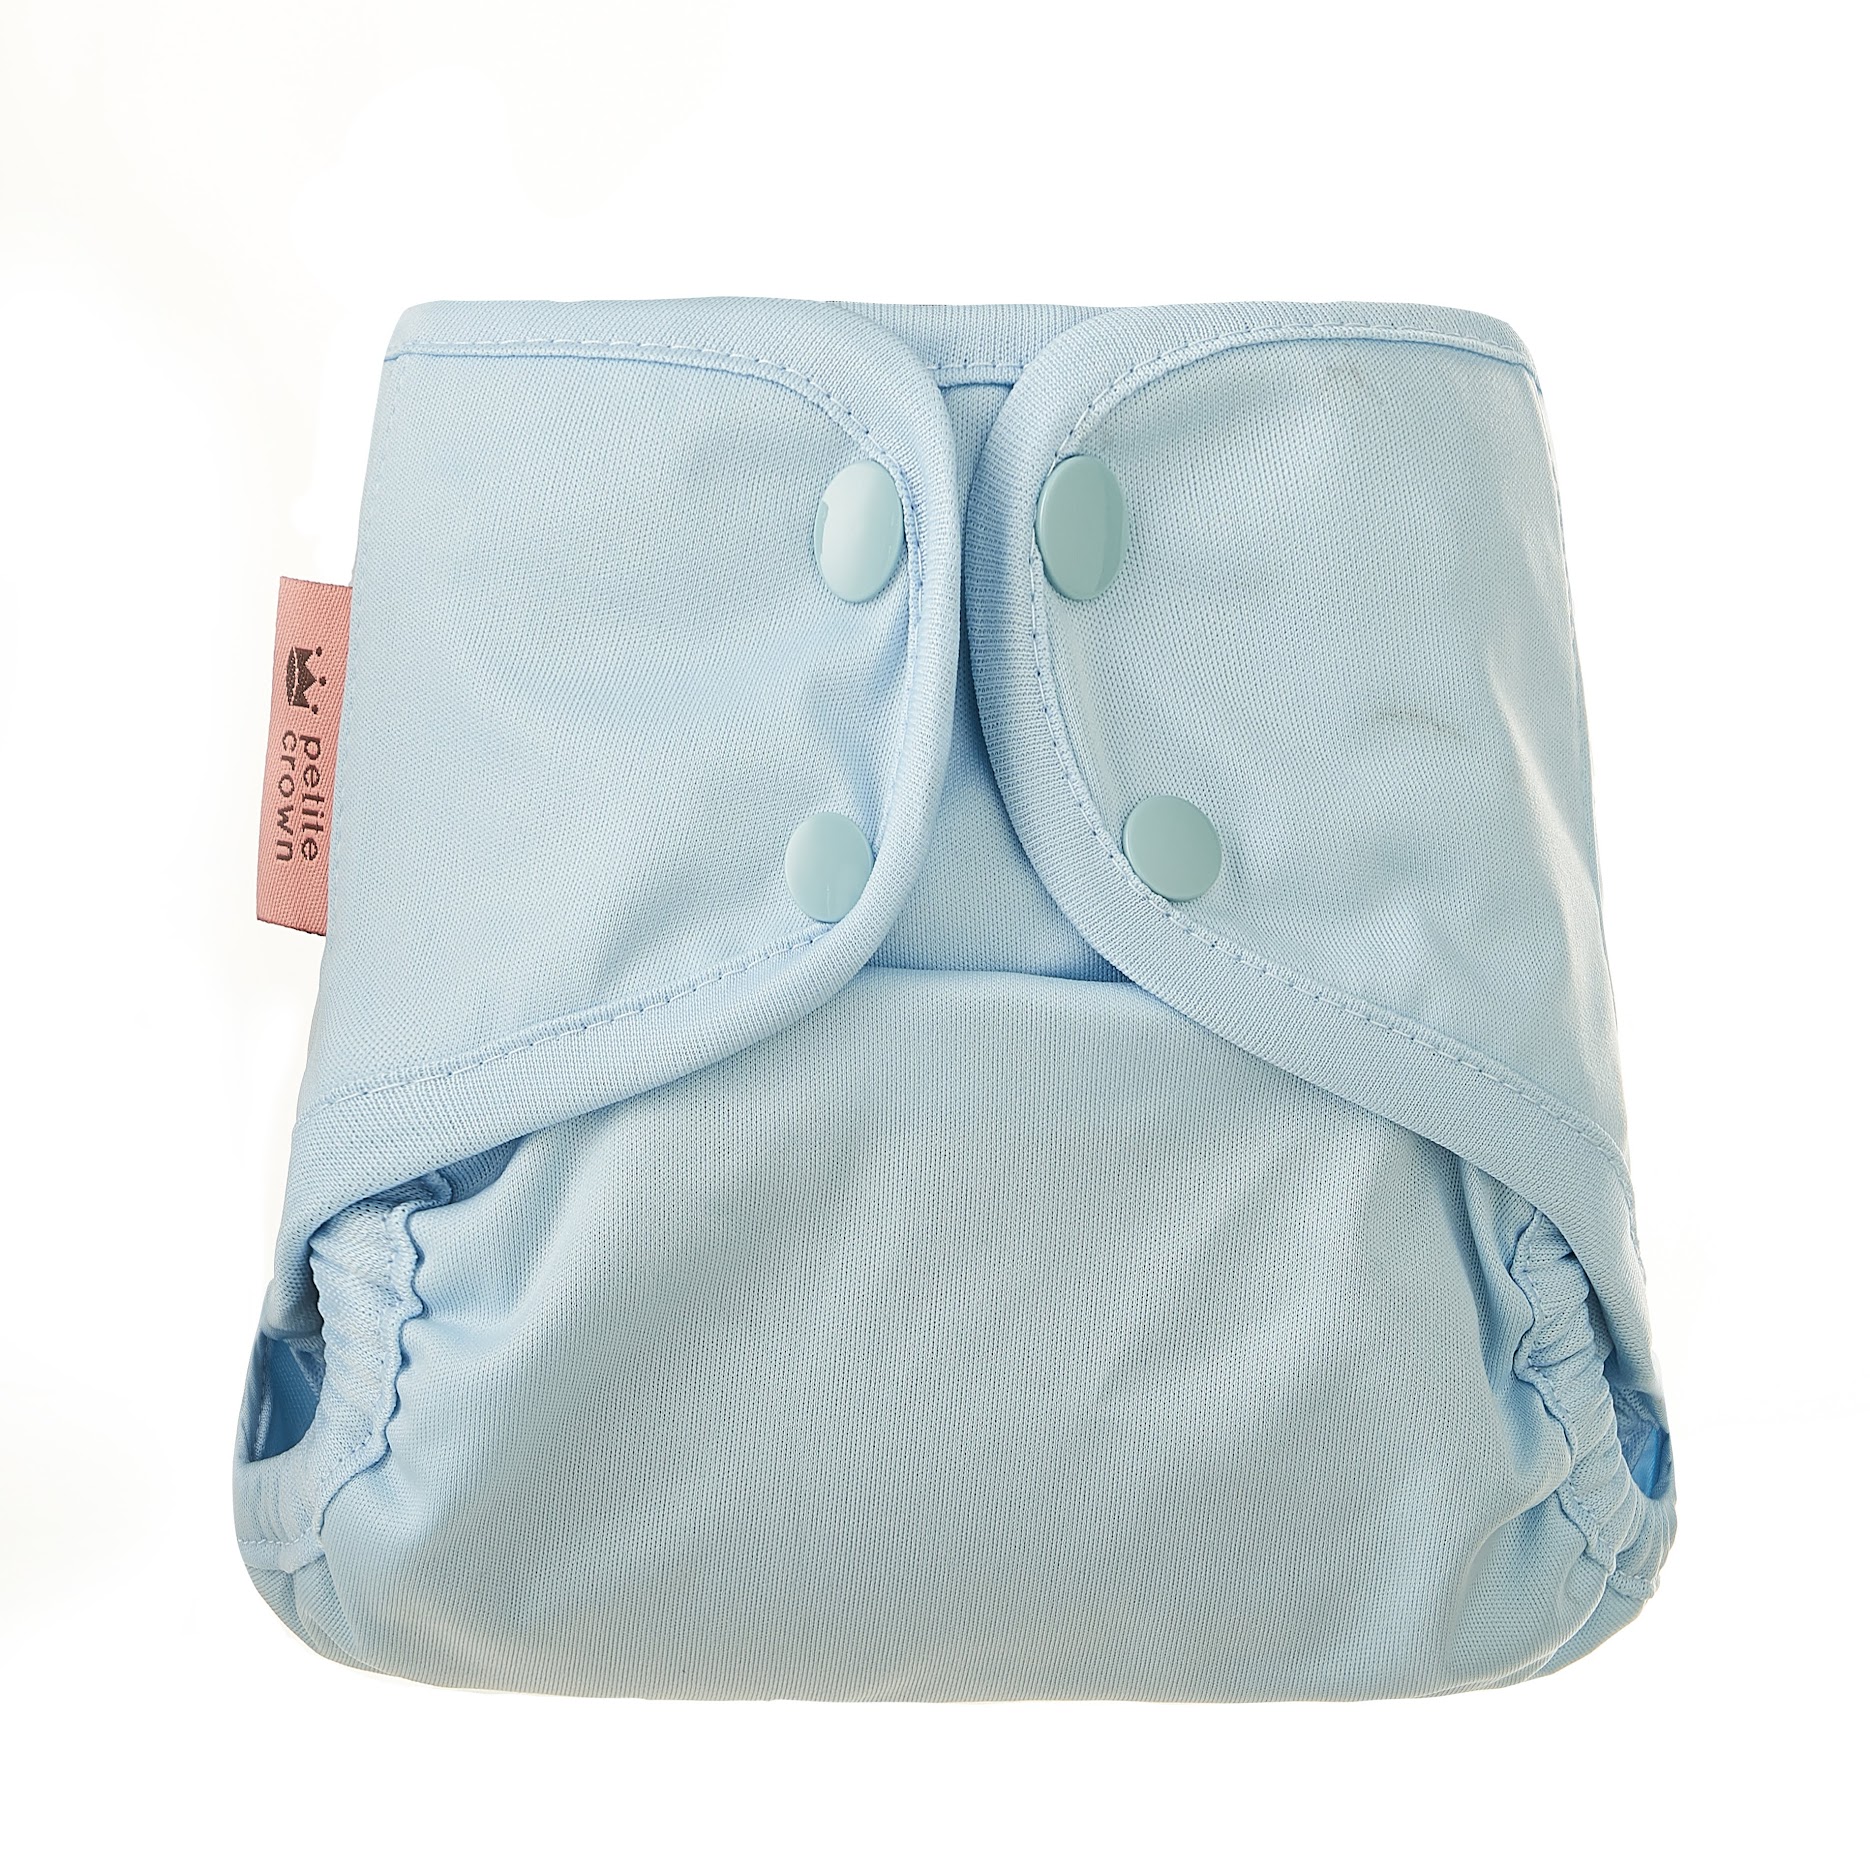 Petite Crown, Catcher, One Size Nappy Cover - Nest Nappies